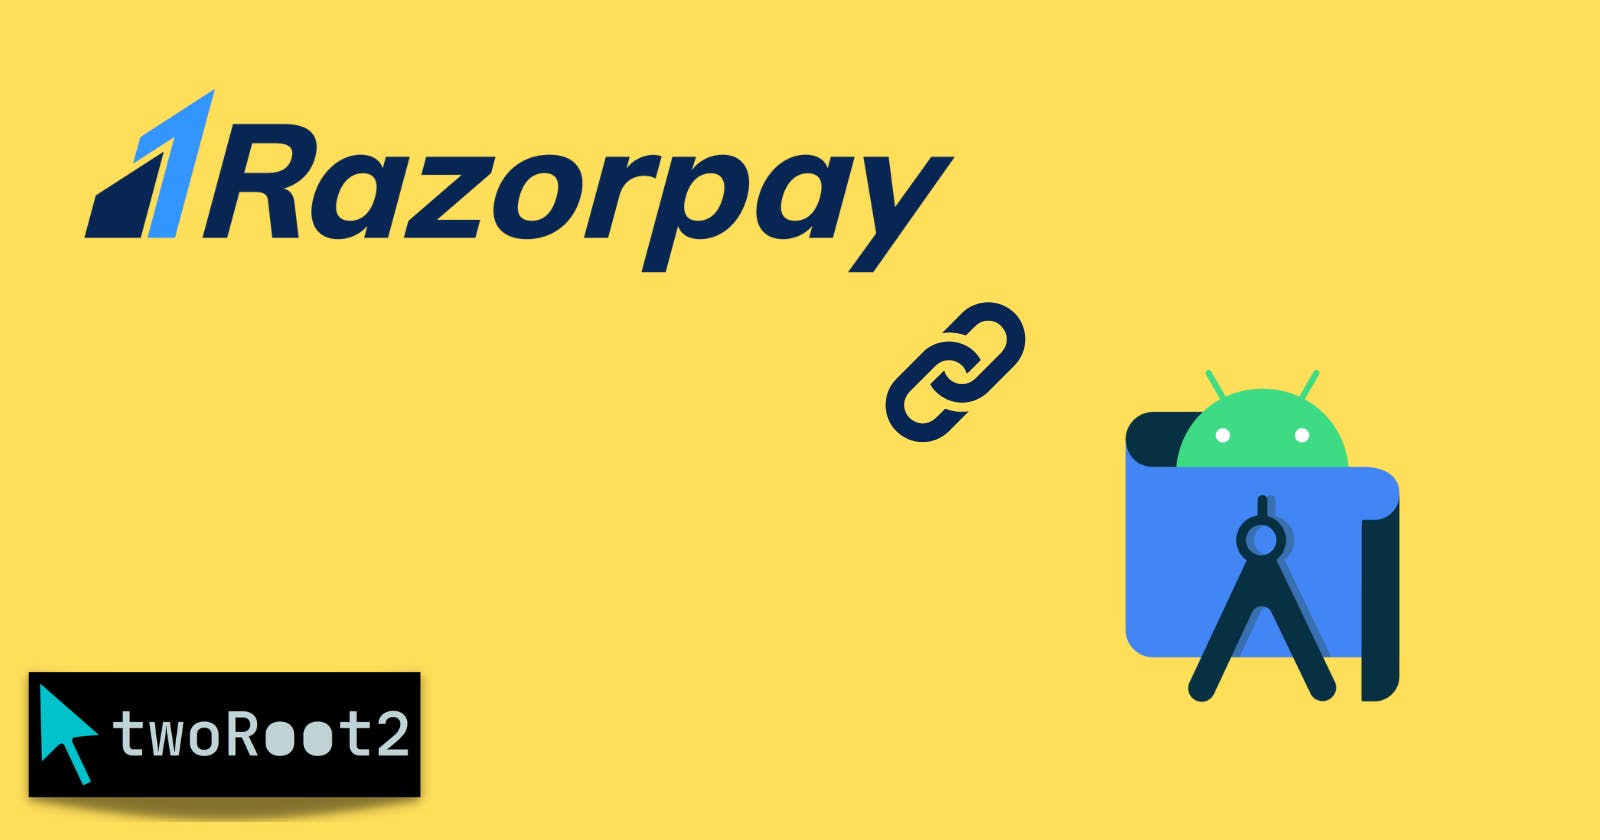 How to connect Razorpay with our android App